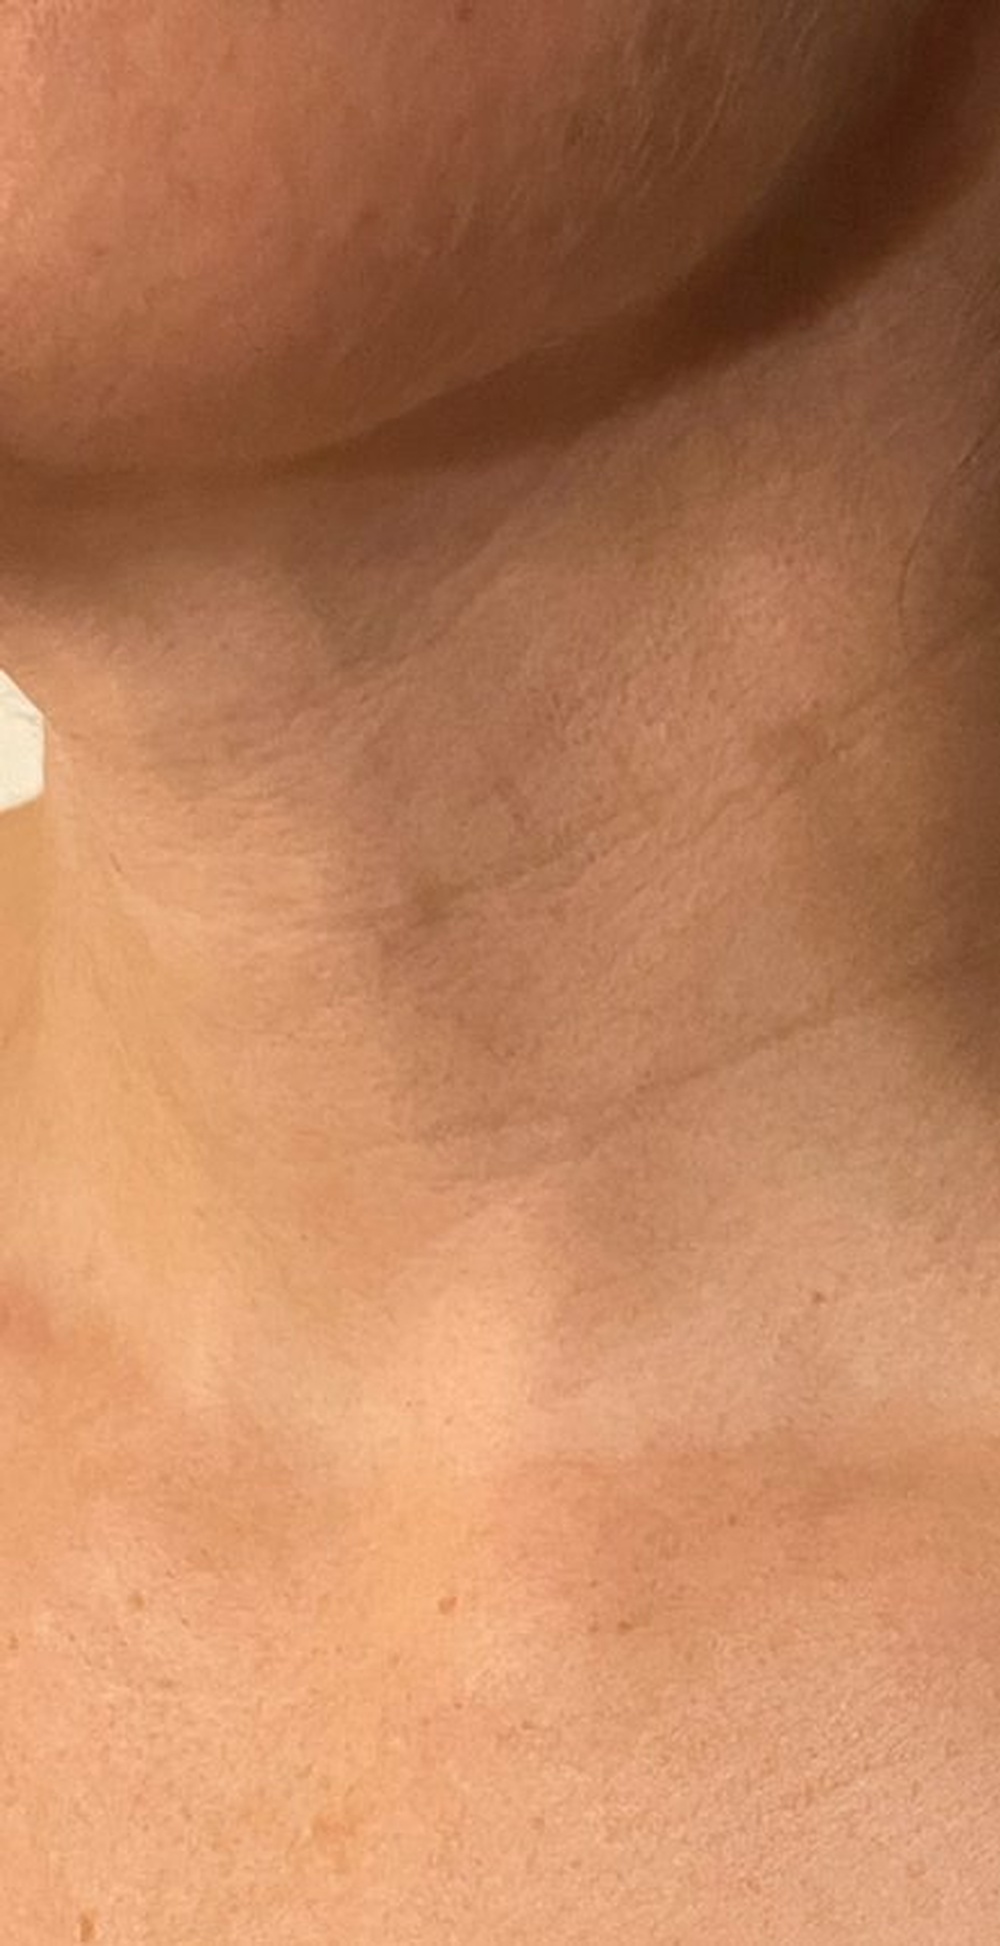 Neck after Skinbooster Treatment at CLINIQUE AG - Medical Clinic in Laval, Montreal